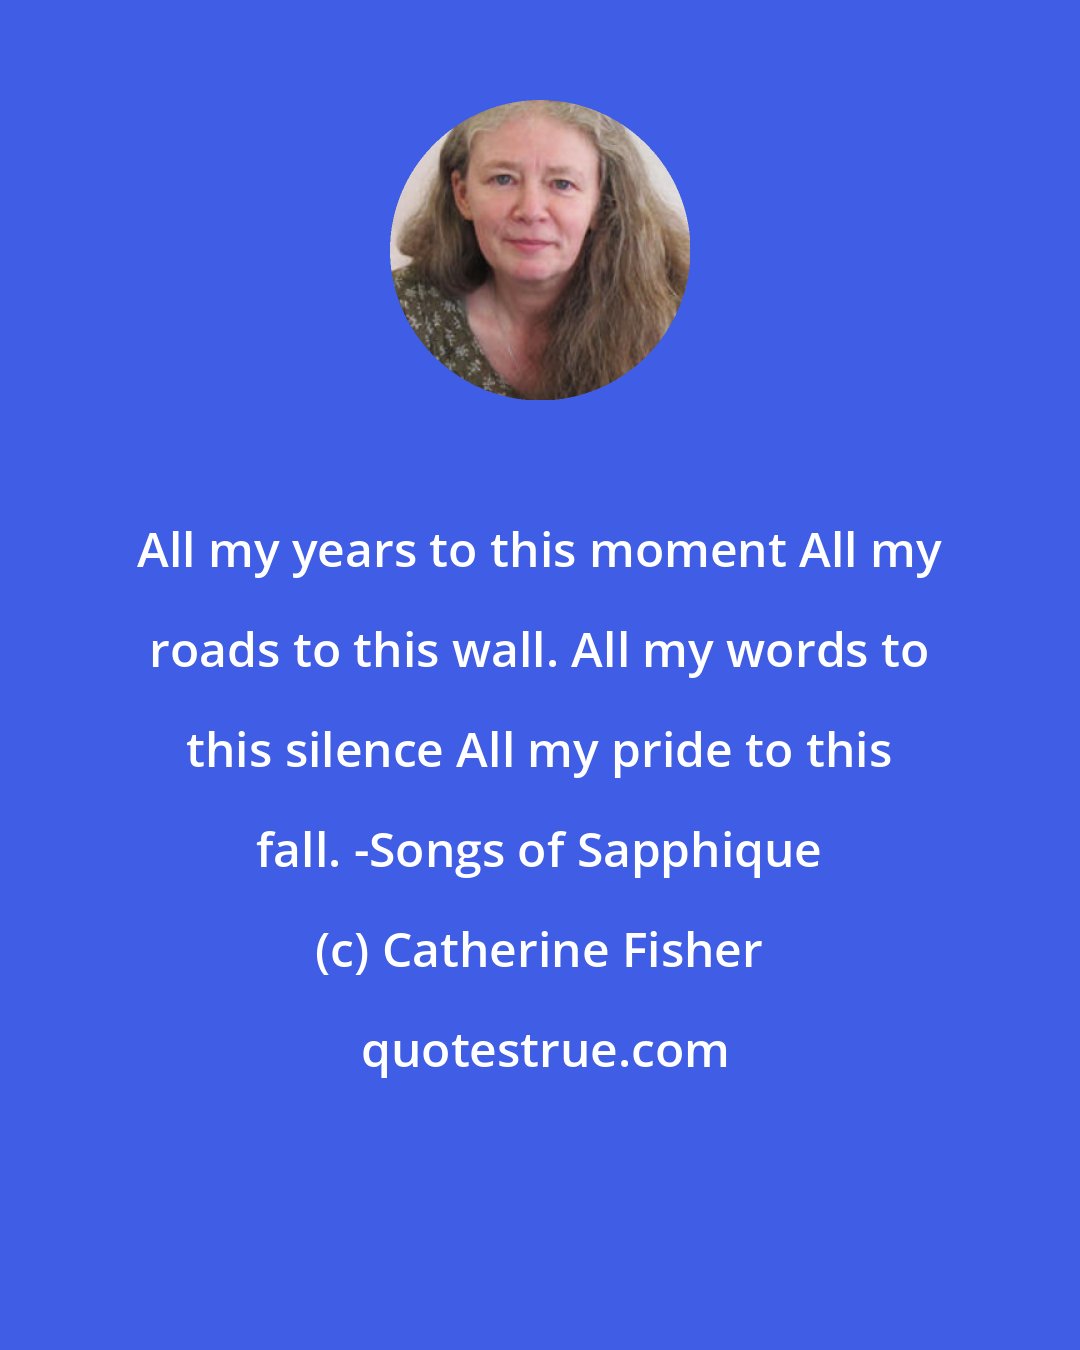 Catherine Fisher: All my years to this moment All my roads to this wall. All my words to this silence All my pride to this fall. -Songs of Sapphique